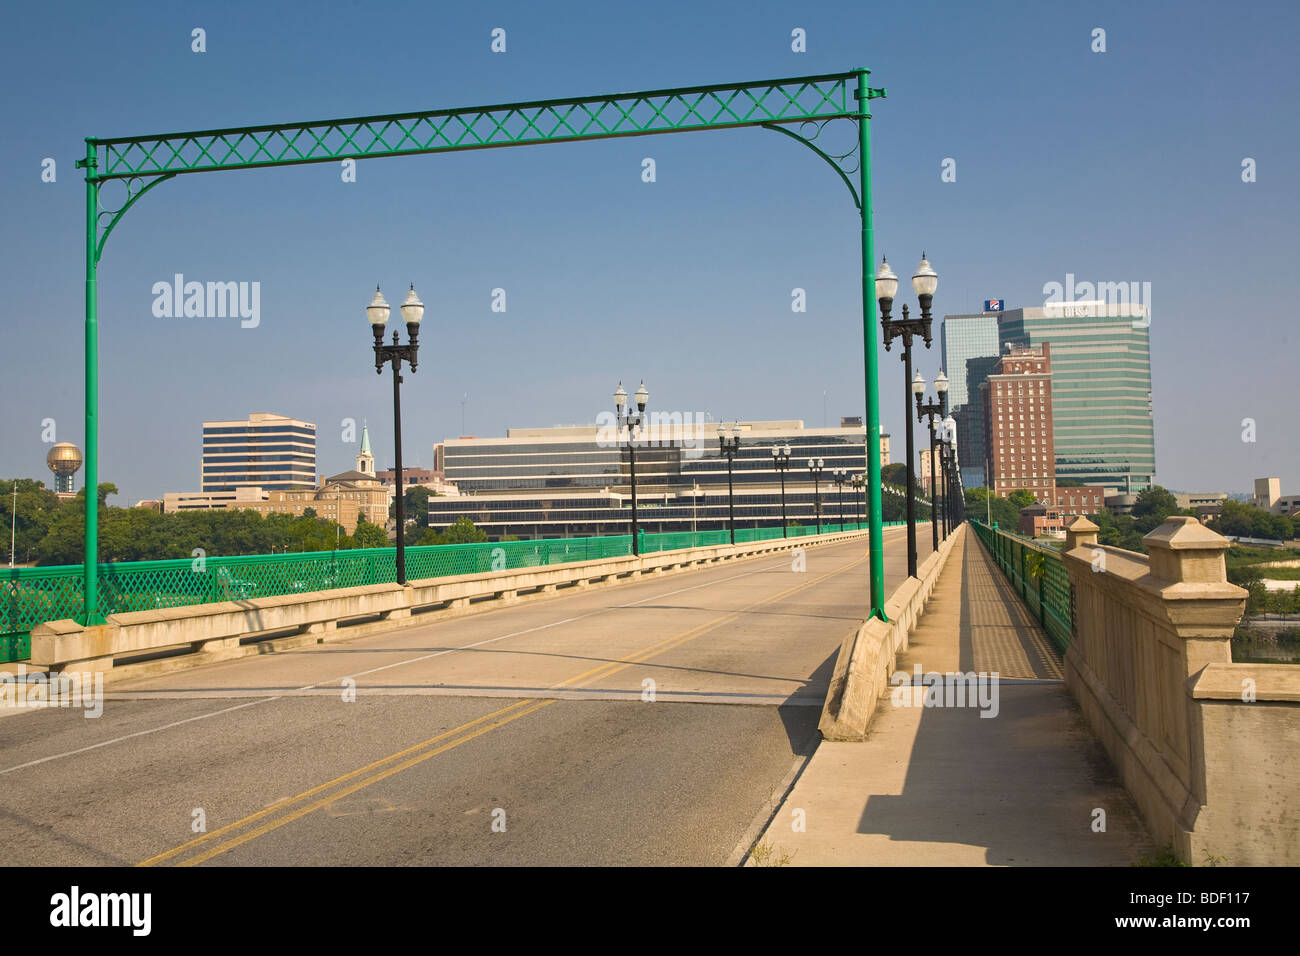 Gay Street Bridge in Knoxville Tennessee Stockfoto